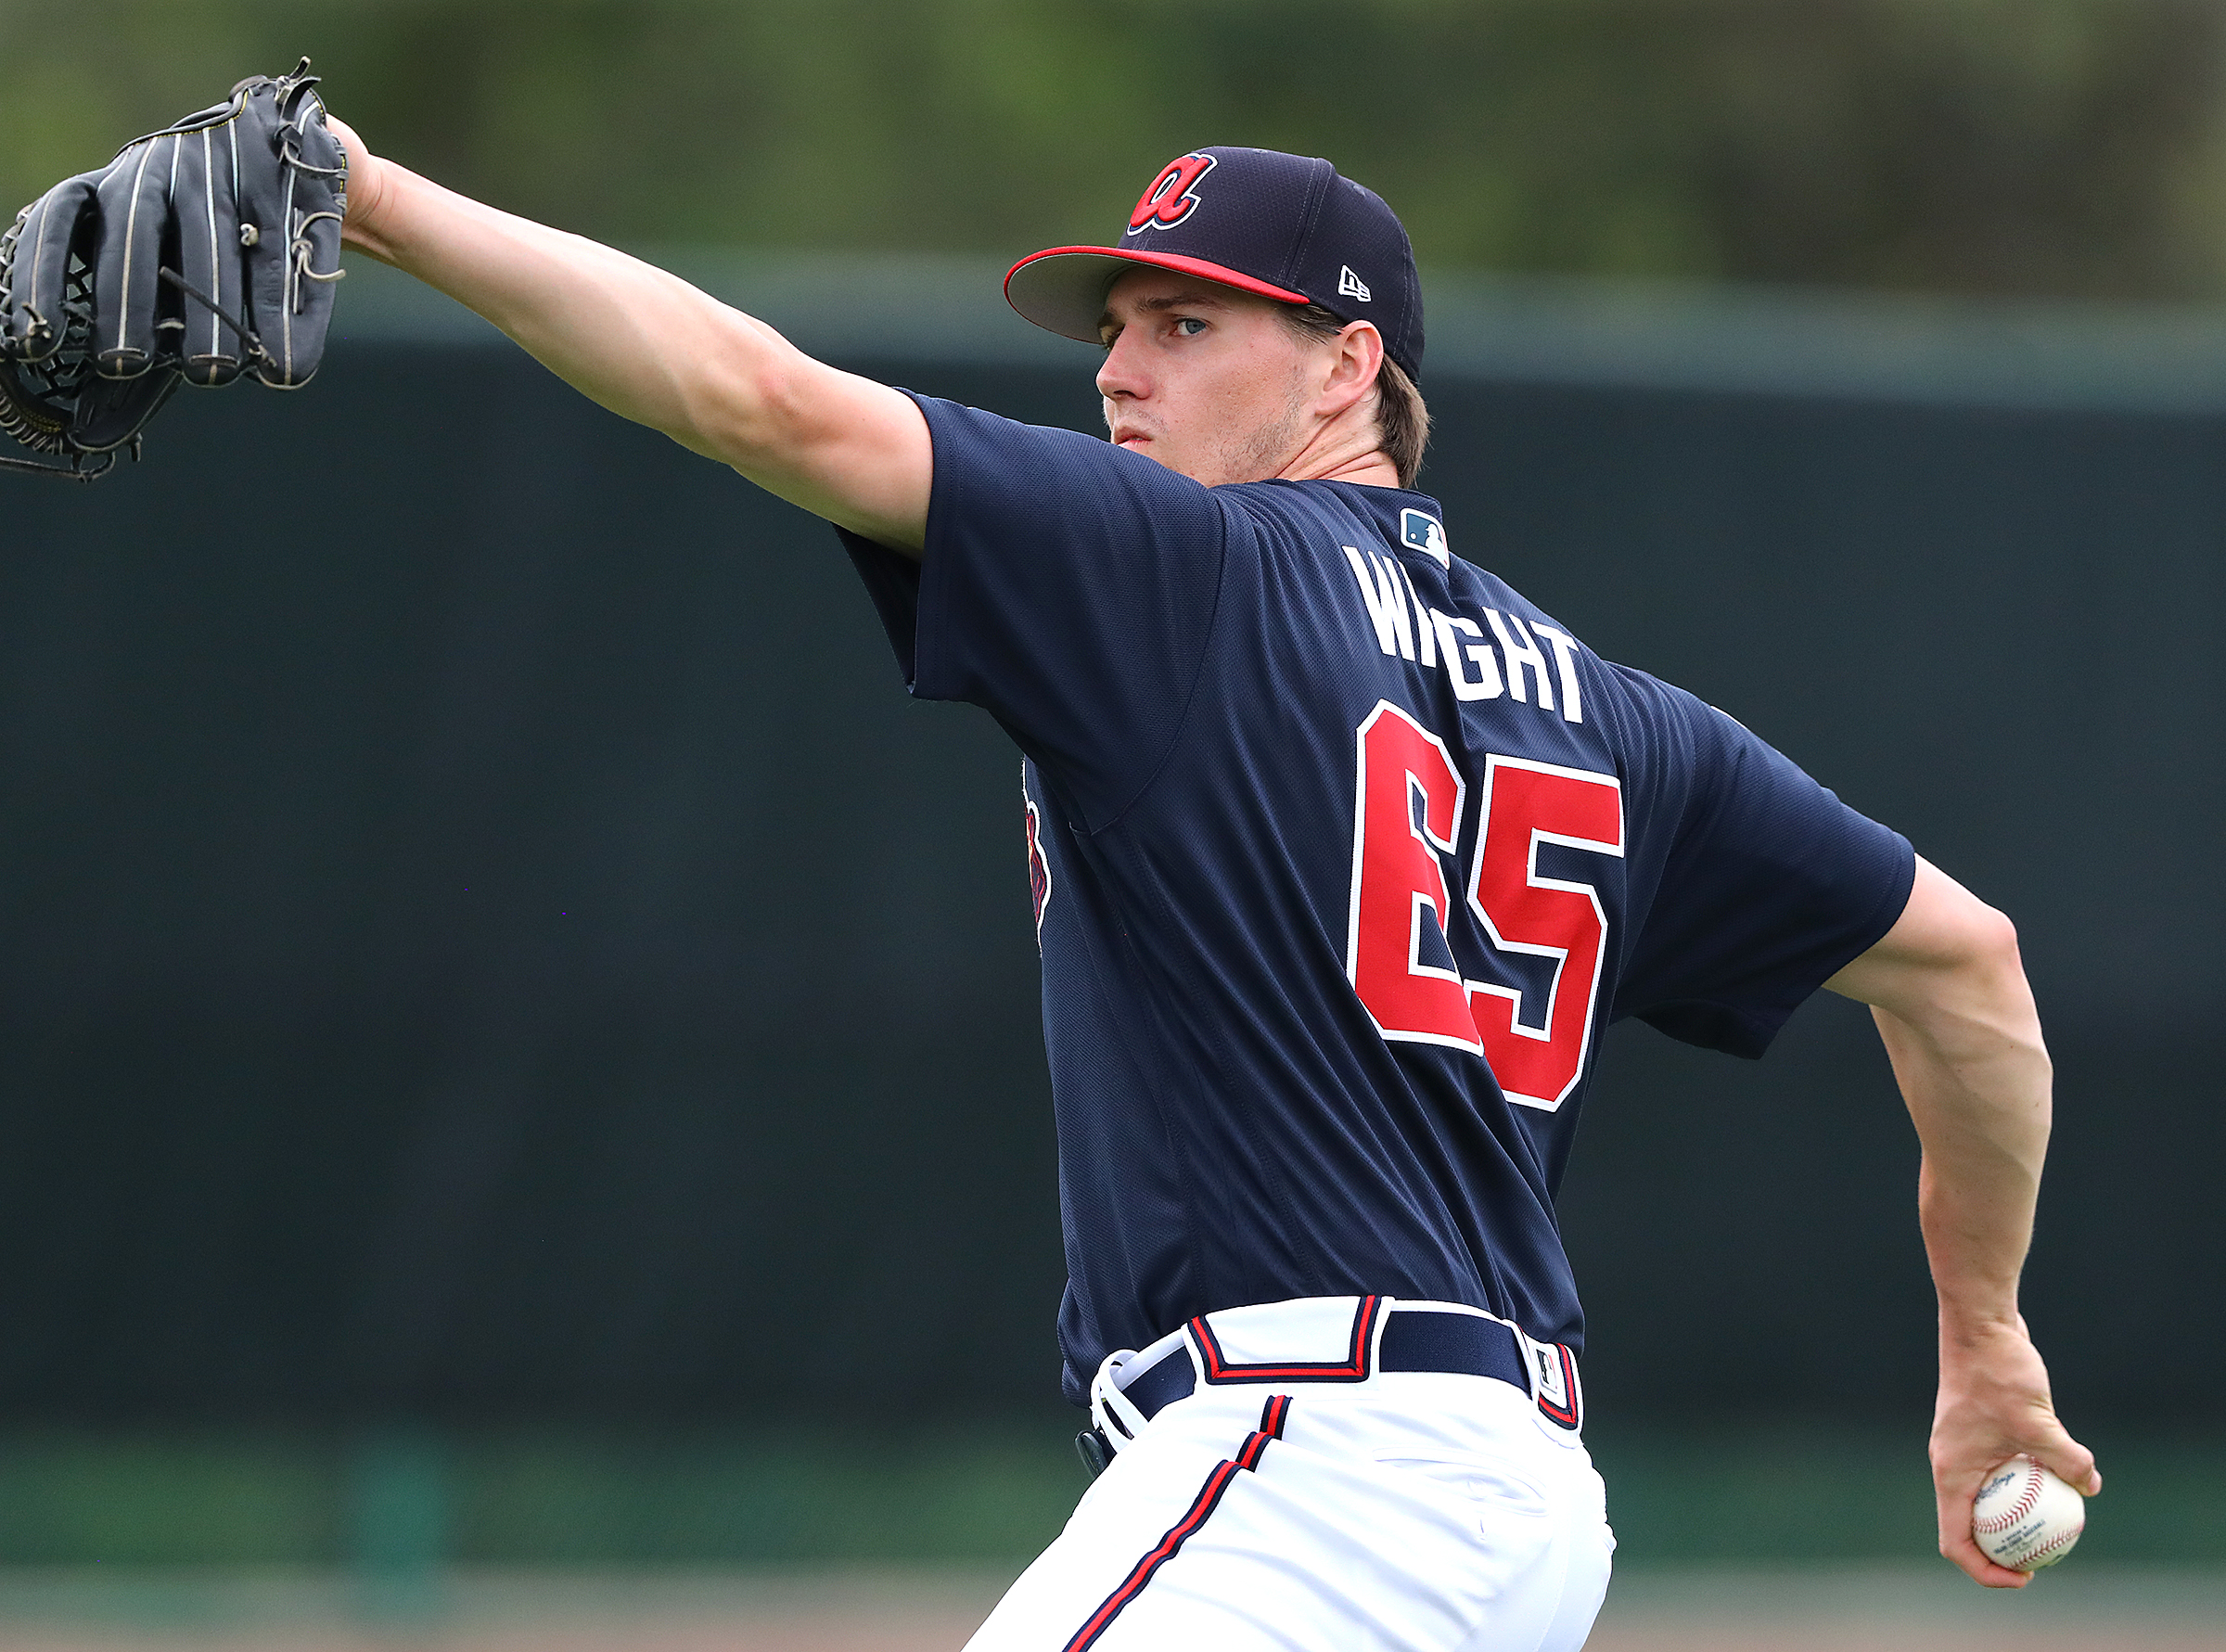 Kyle Wright returns to Braves with new look